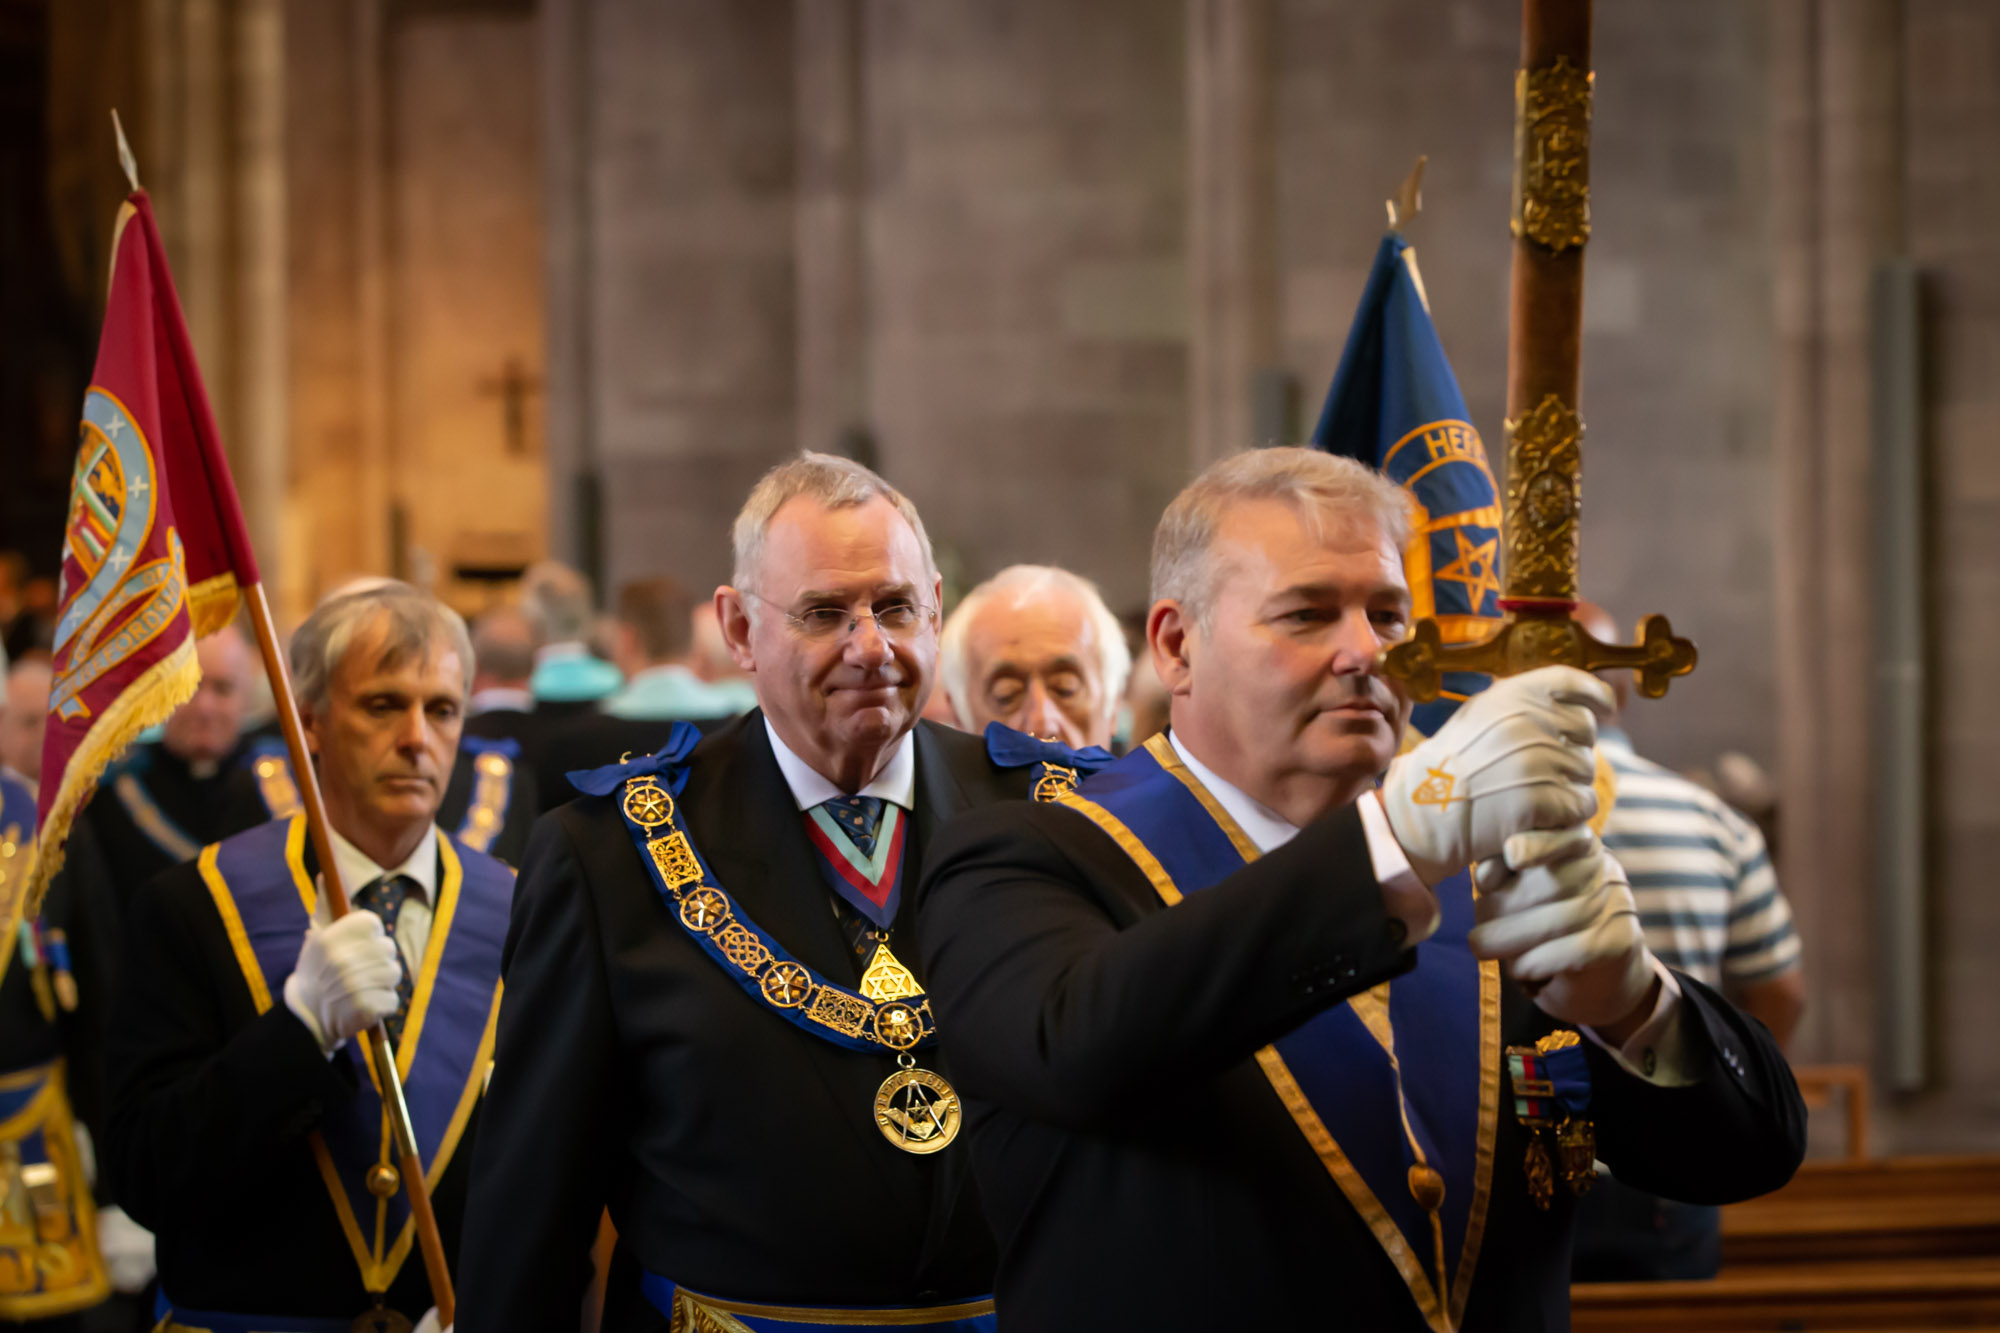 The Provincial Grand Master for Herefordshire RW Bro Michael Holland being lead out of the Cathedral service by the Grand Sword Bearer W Bro Johnny Walker.